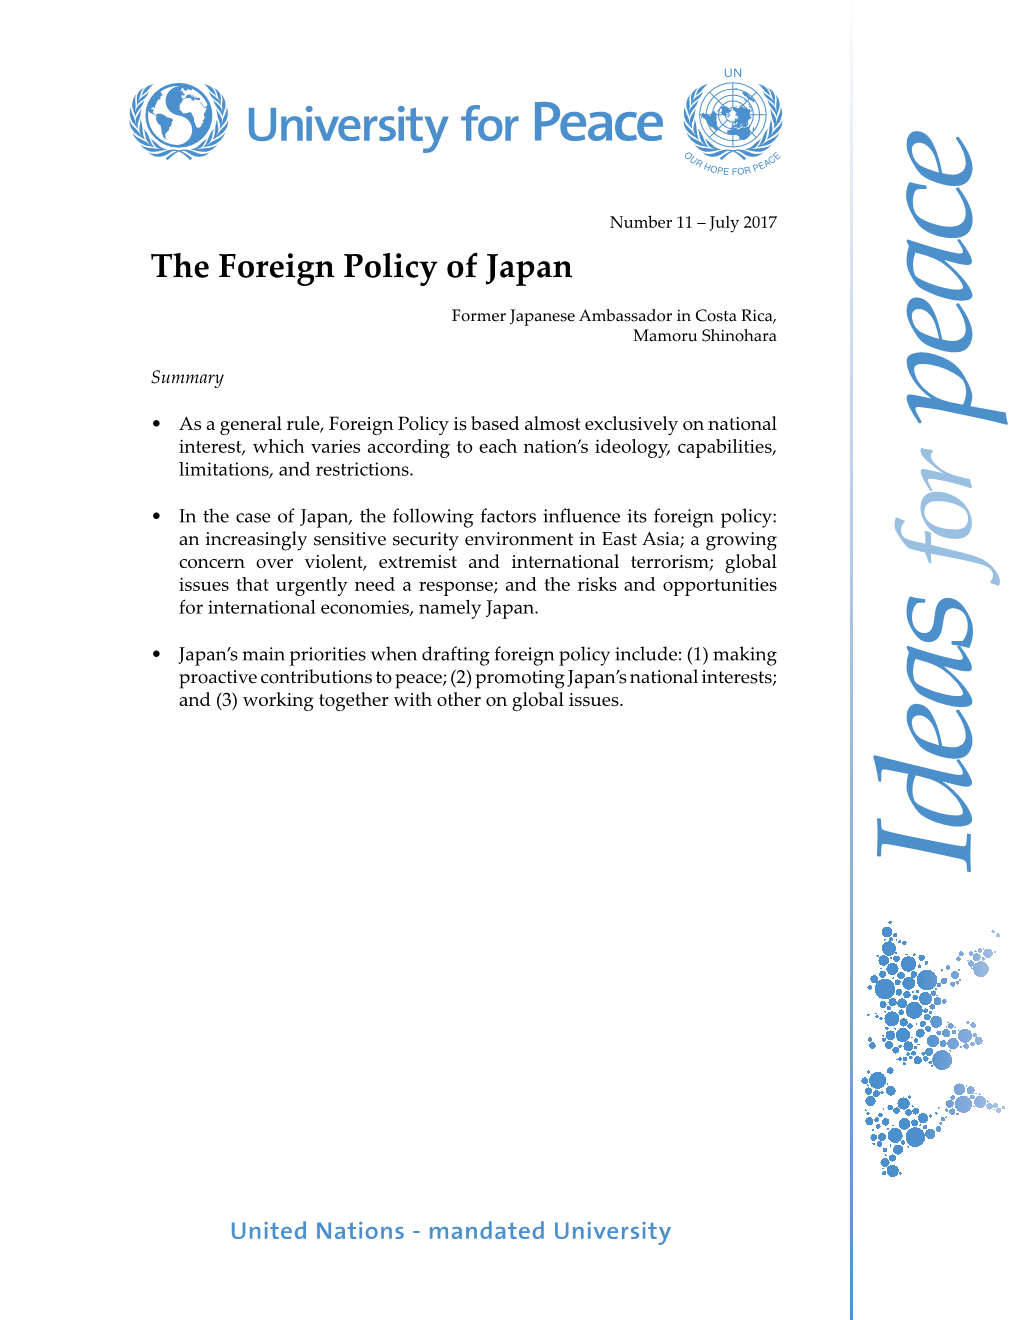 The Foreign Policy of Japan